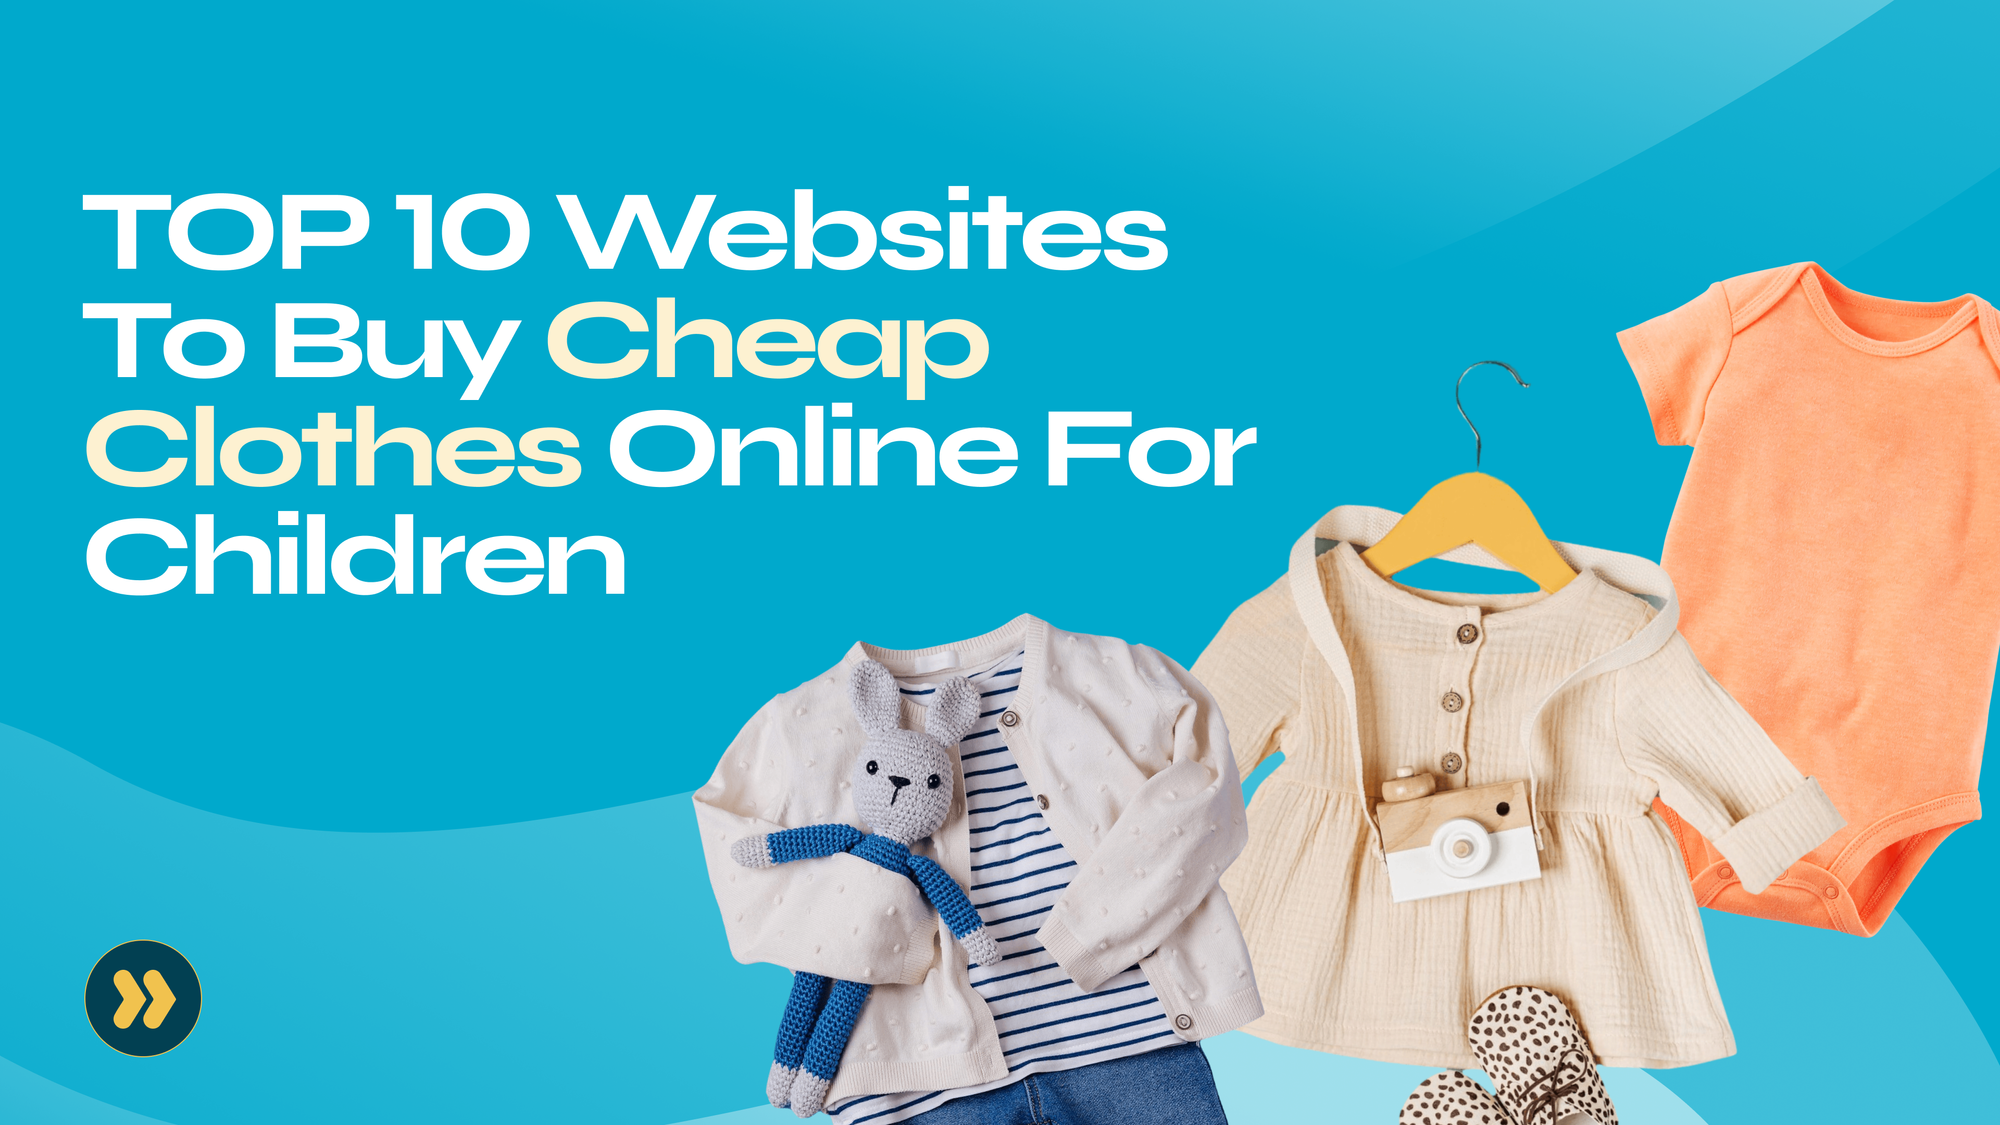 Top 10 Websites to Buy Cheap Clothes for Children